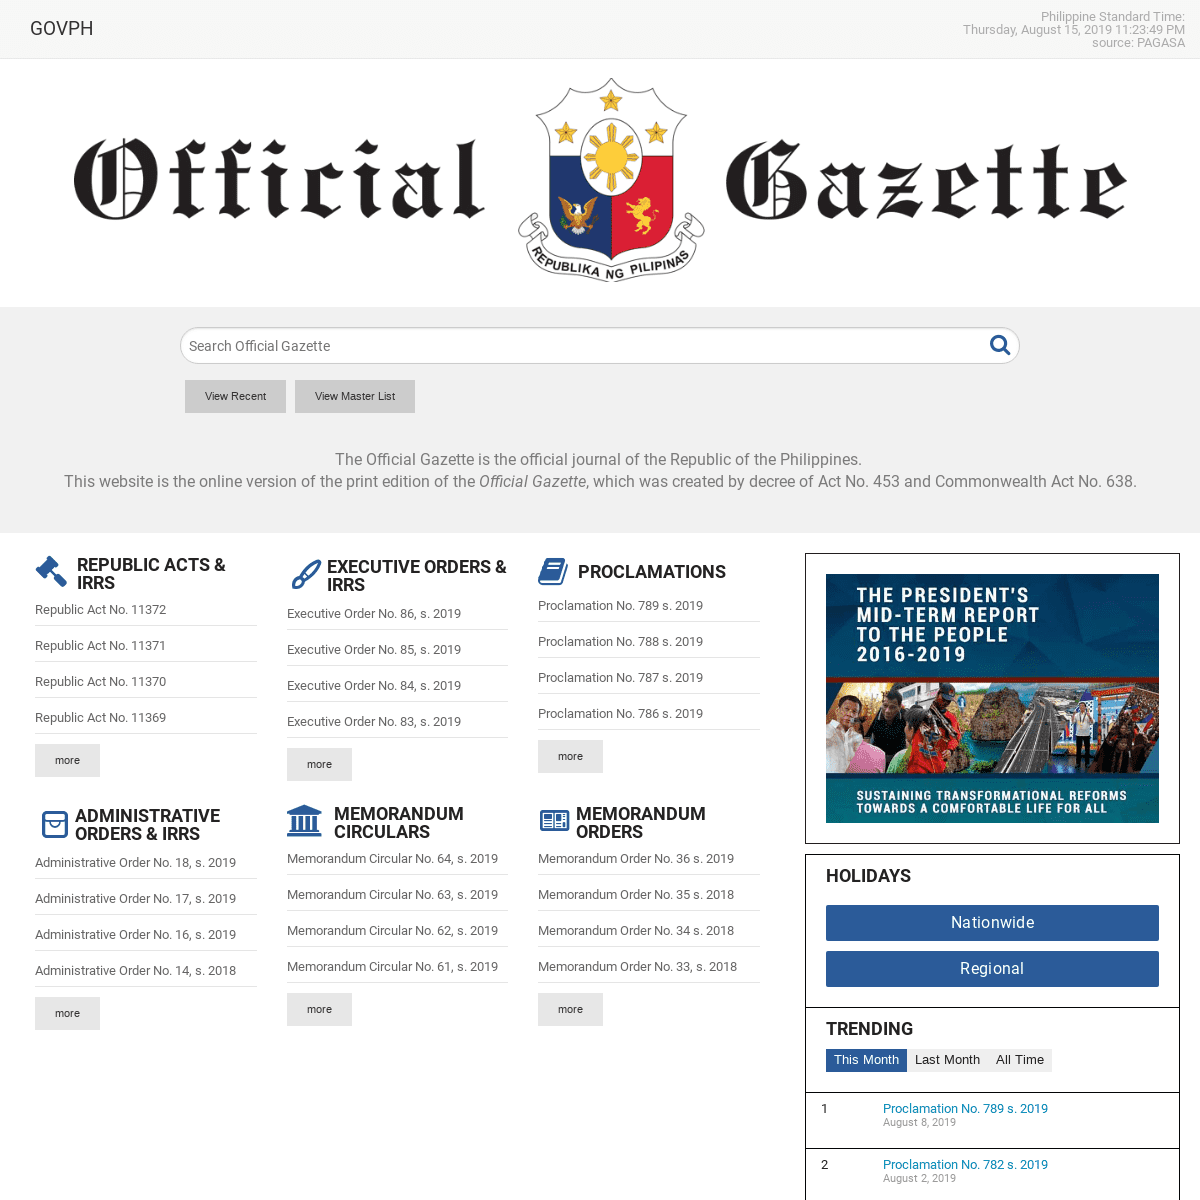 Official Gazette of the Republic of the Philippines | The Official Gazette is the official journal of the Republic of the Philip